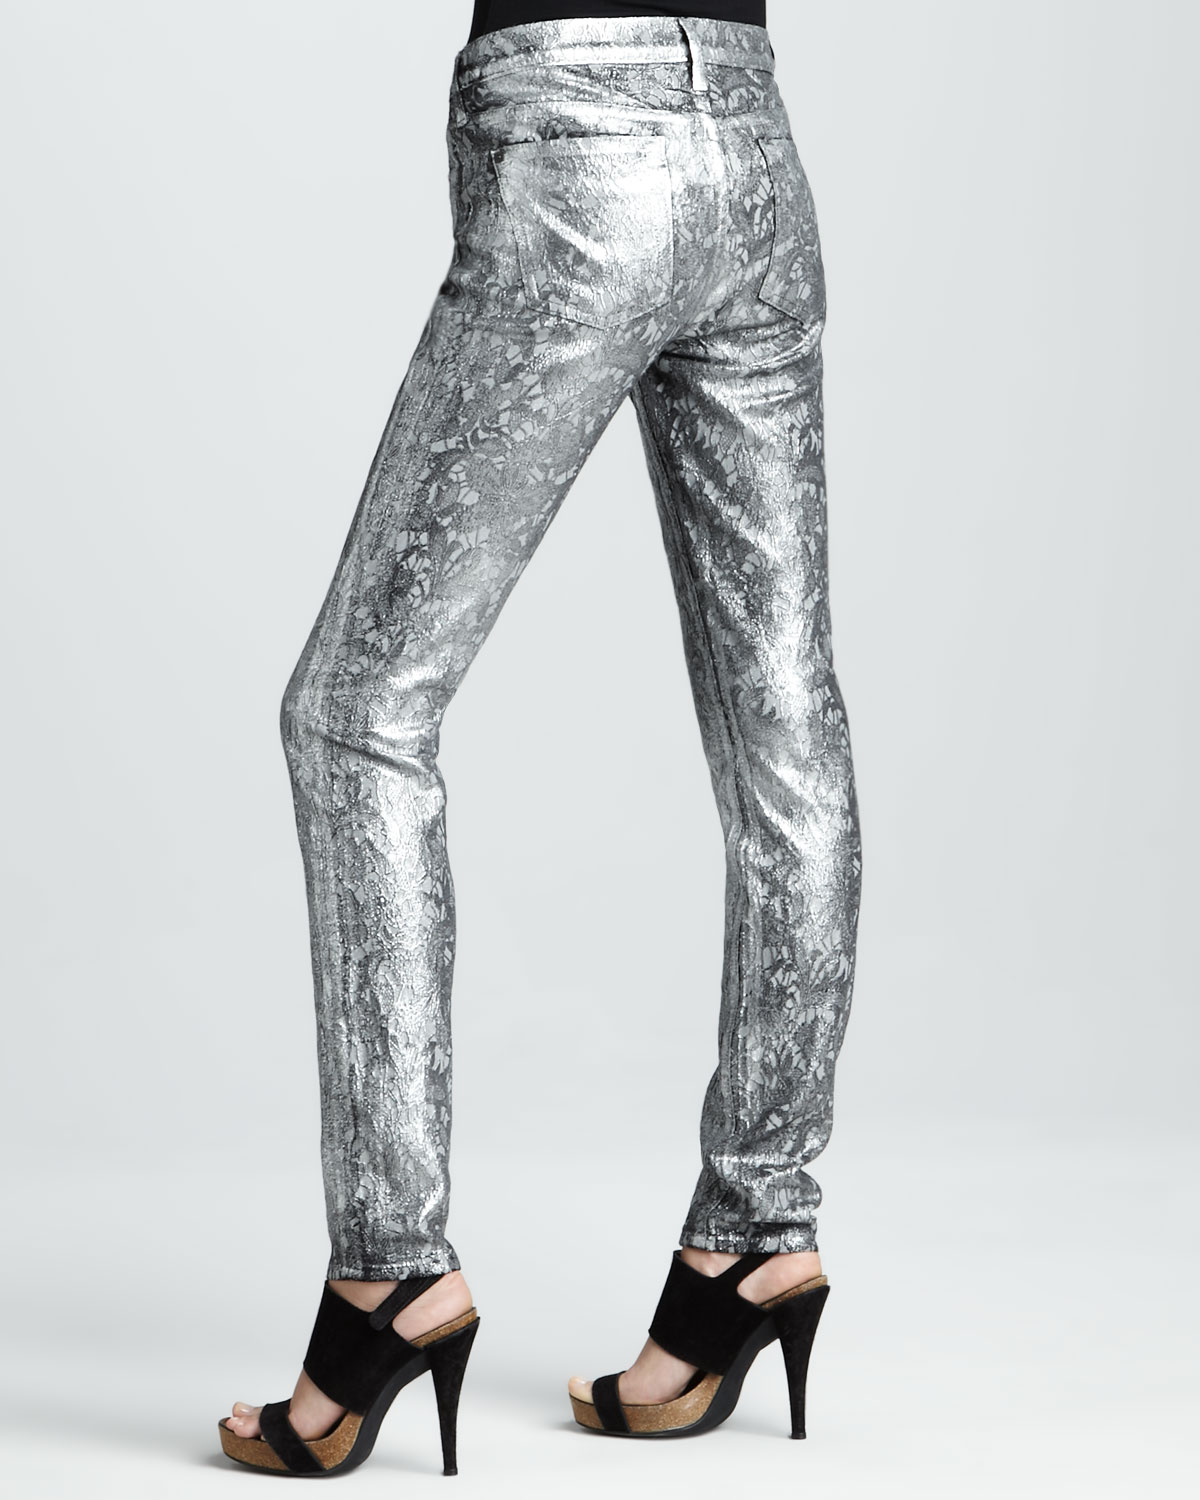 Lyst - 7 For All Mankind Silver Metallic Jacquard Skinny Jeans in Metallic